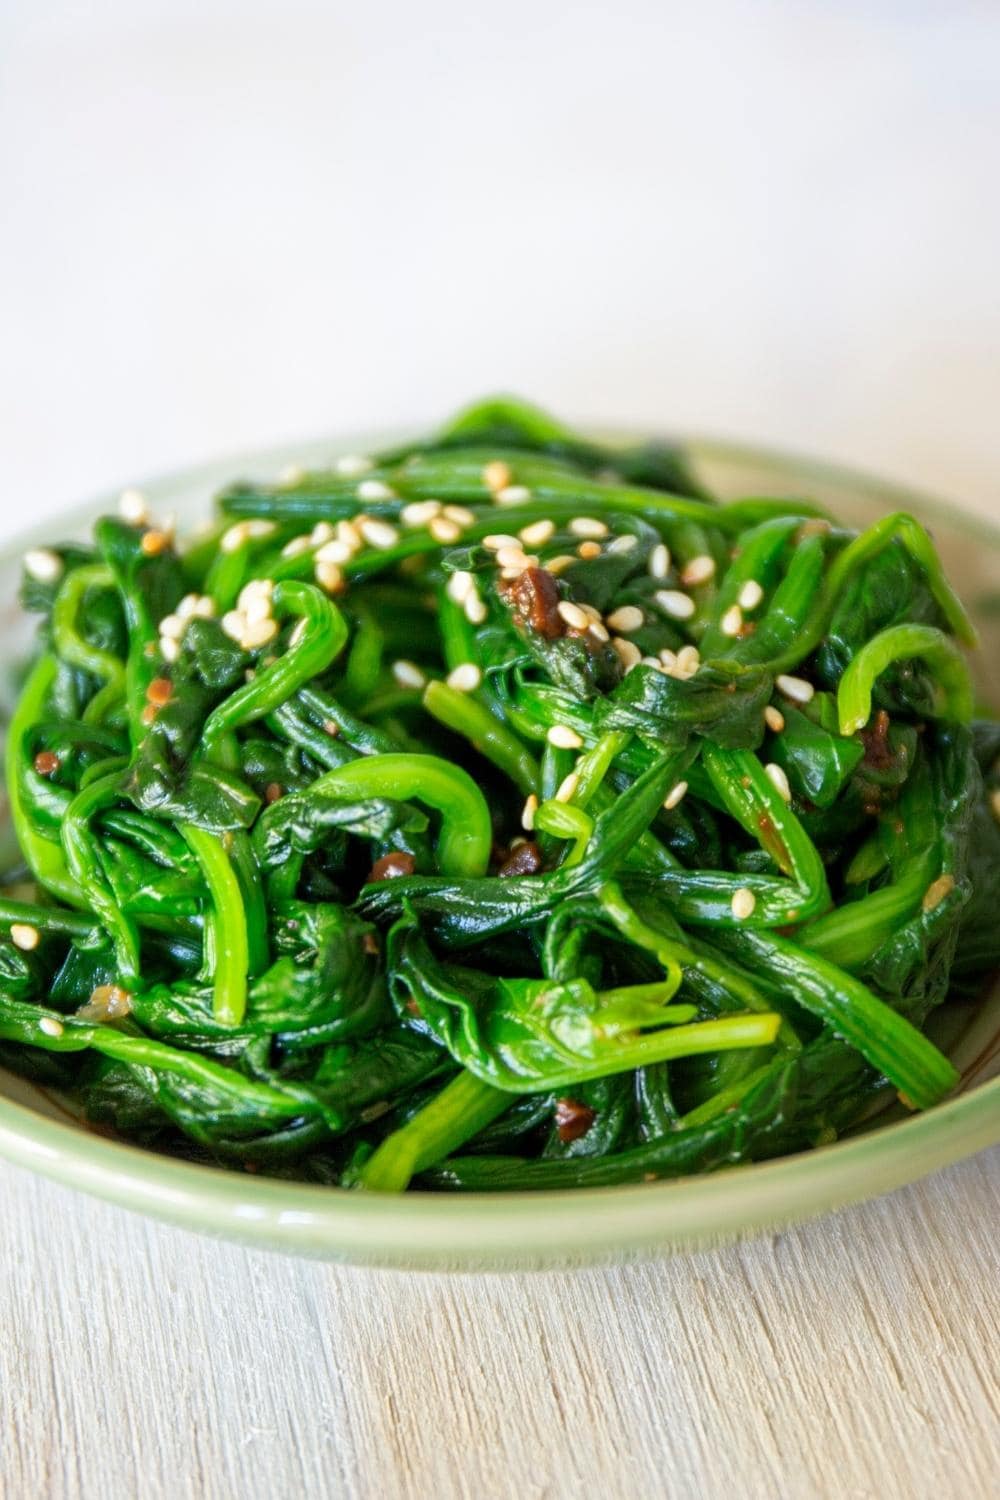 Korean spinach seasoned with sesame and soy